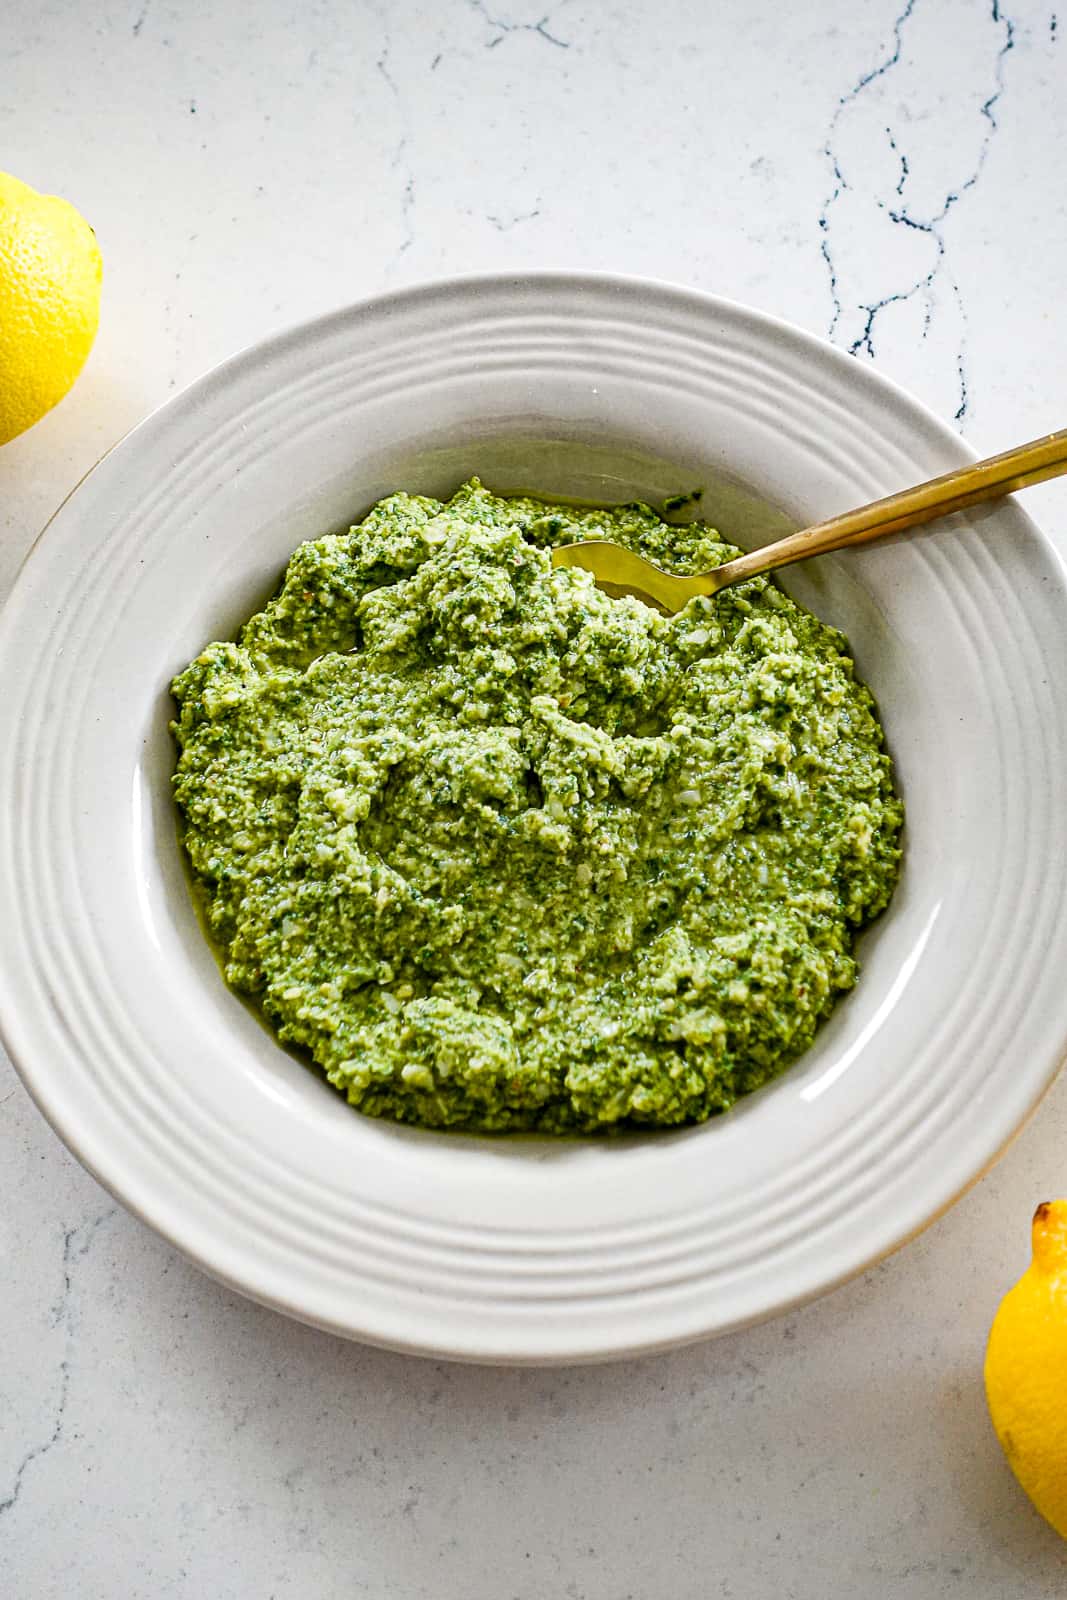 Homemade Basil Pesto from Scratch with lemons